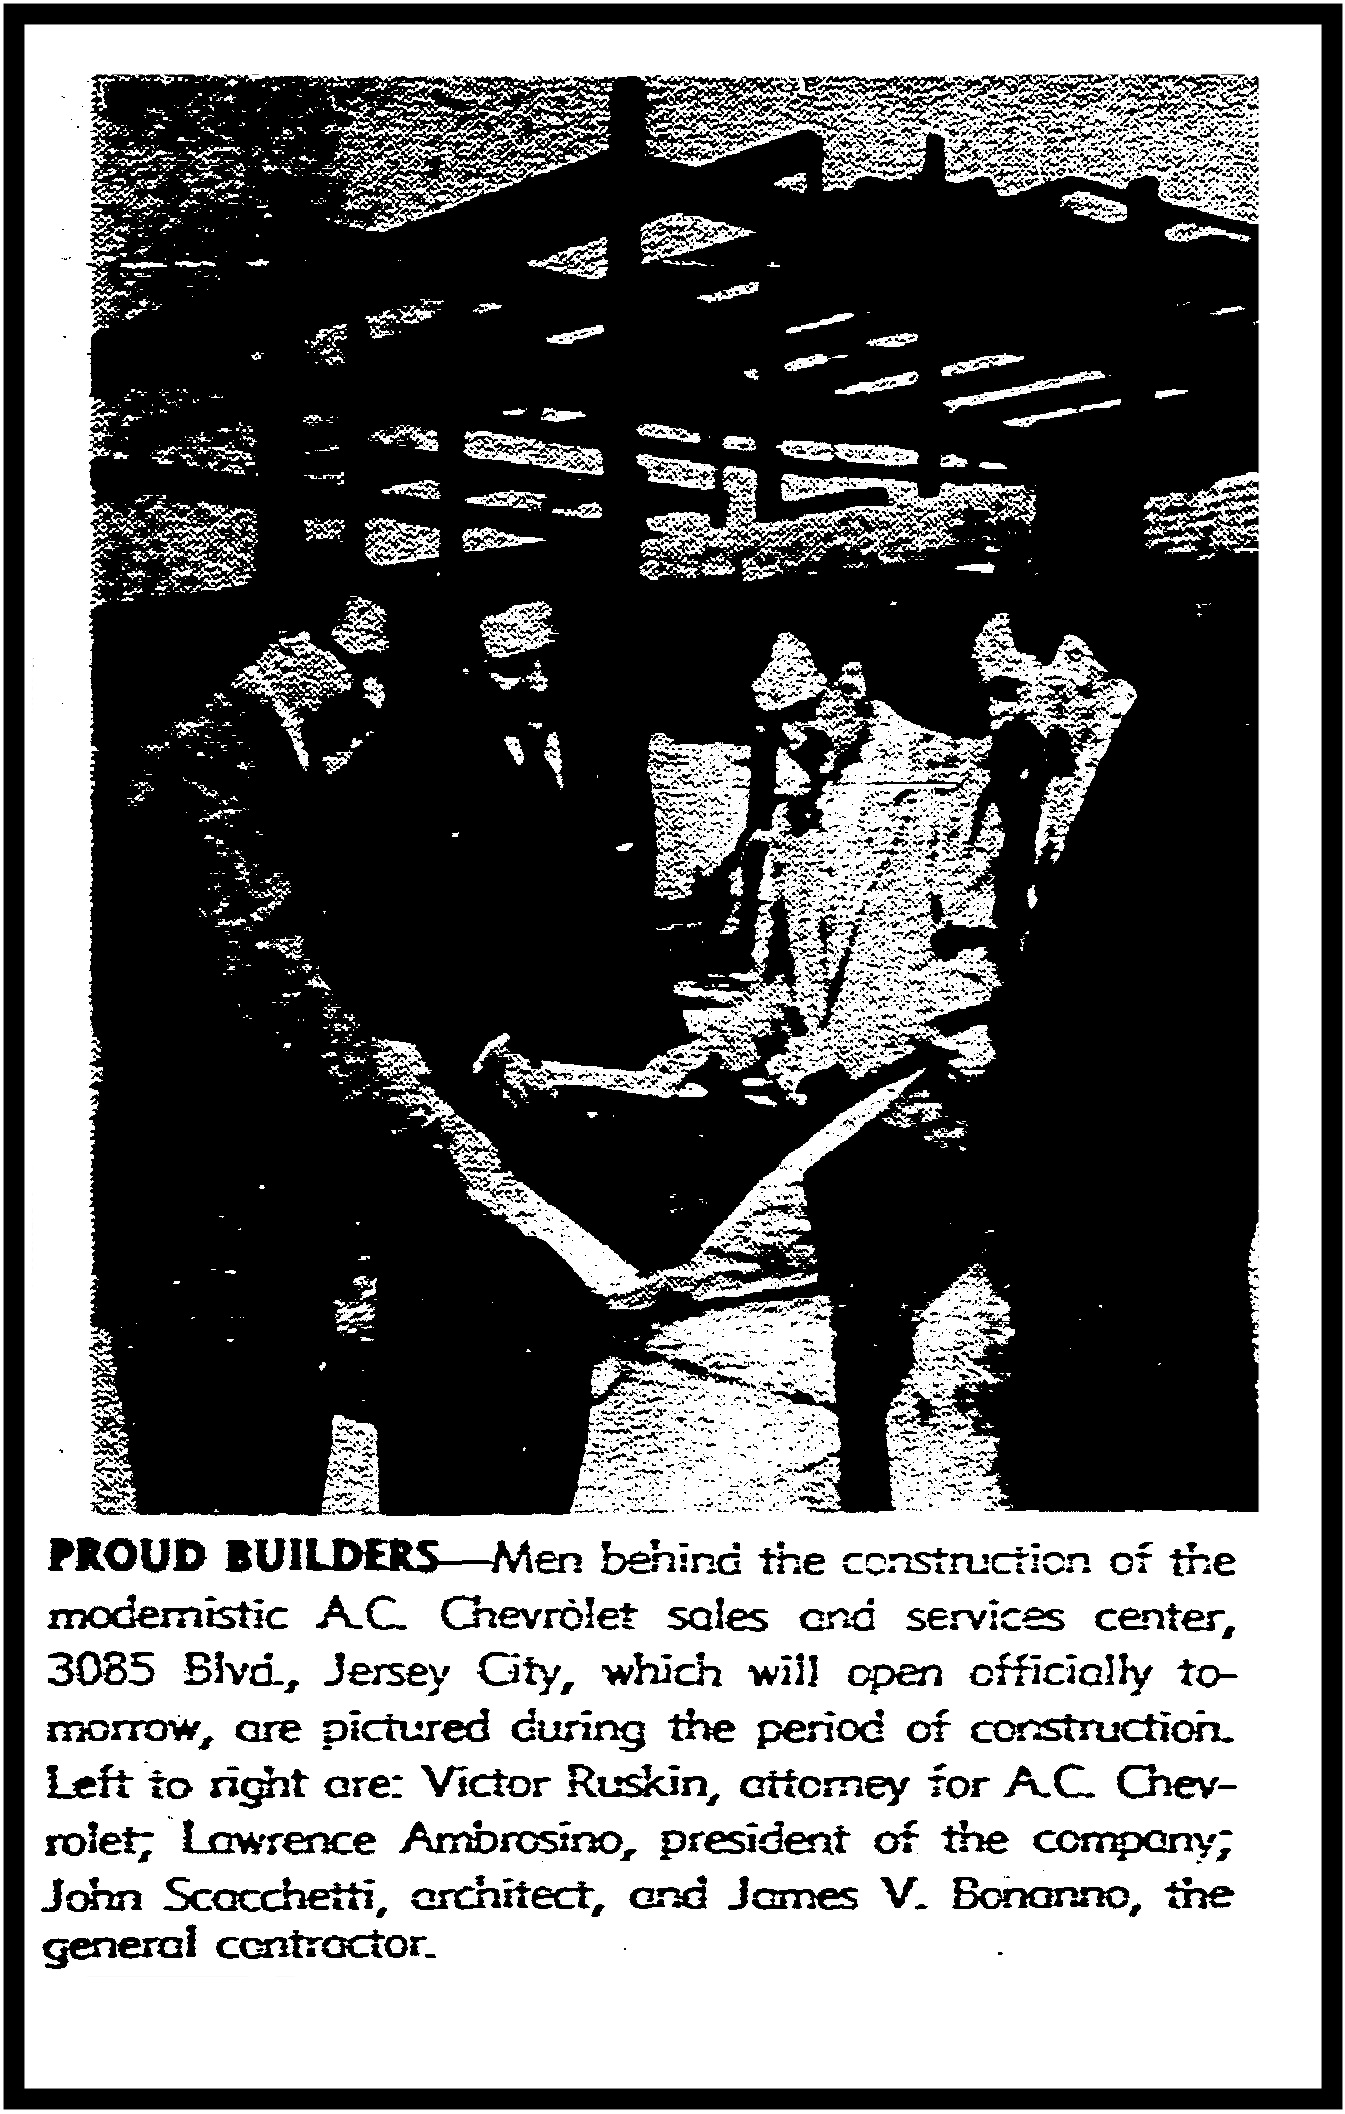 The Jersey Journal, Dec. 11, 1953: Throughout 1953, Hudson County newspapers featured various construction stages of the rising A.C. Chevrolet automotive center and showroom at 3085 Hudson Blvd. (now Kennedy Boulevard), from steel framings to concrete pours to shovel-turnings. Reaching the pinnacle of his car dealer career and respected position in the local Italian-American community, Lawrence Ambrosino (1904-1990) worked with some of the area's best builders to bring his vision to physical manifestation, including Union City architect John Scacchetti (1900-1971) and general contractors Bonanno Brothers. Pictured here were, from left, dealership attorney Victor Ruskin, Ambrosino, Scacchetti and general contractor James V. Bonanno. -- John Gomez